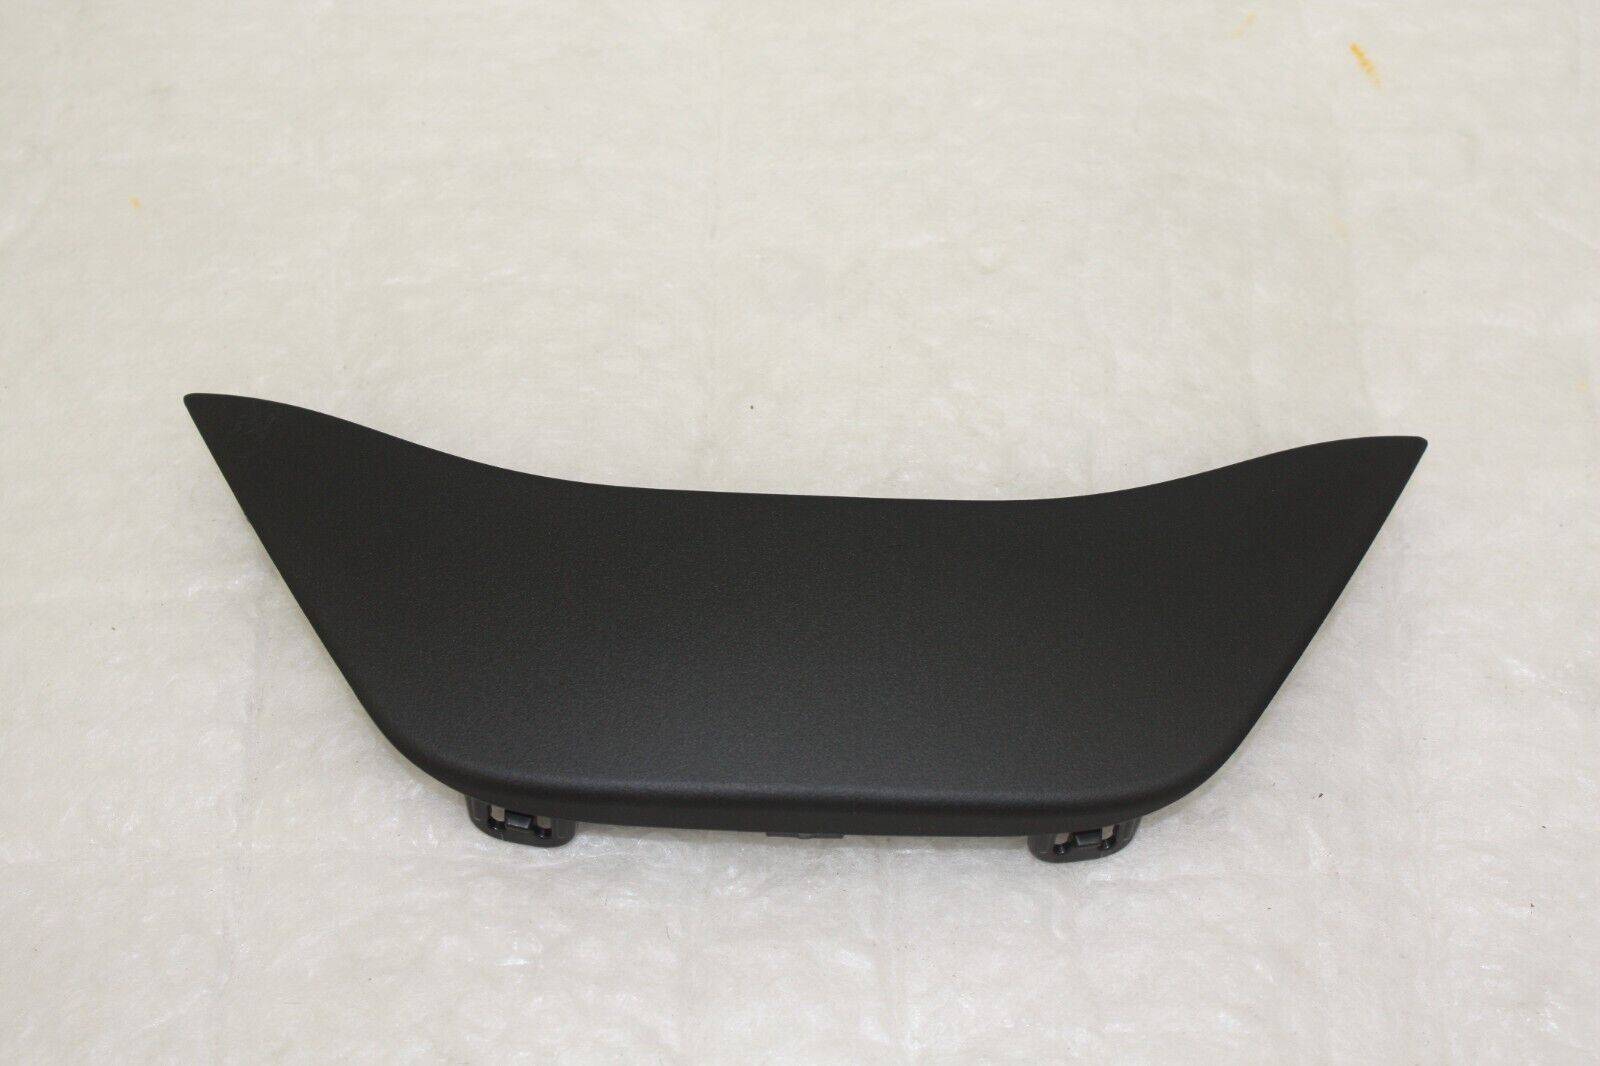 Toyota-Yaris-Front-Bumper-Grill-Cover-2020-ON-53155-K0031-Genuine-176345660711